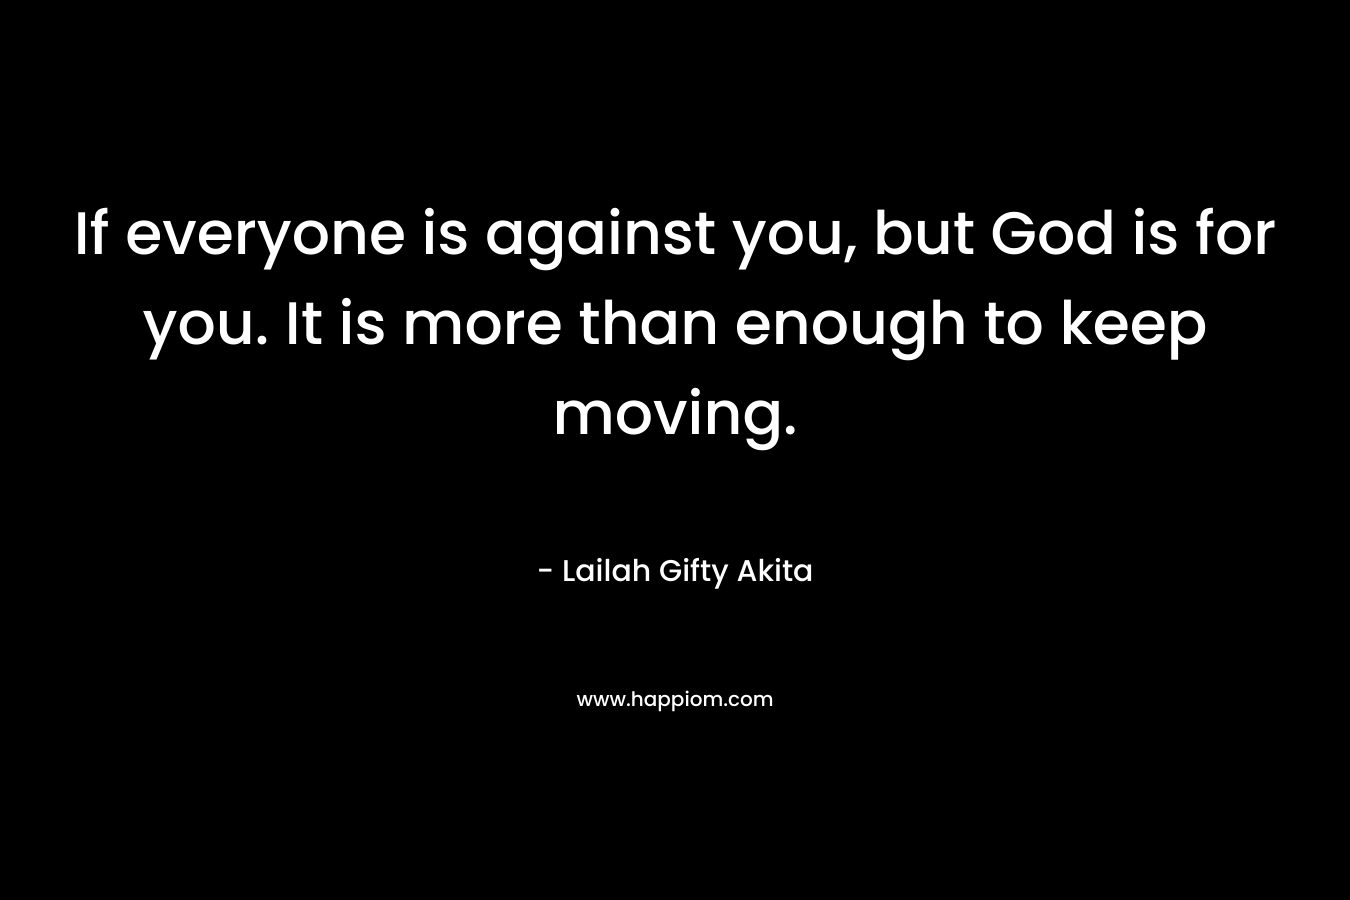 If everyone is against you, but God is for you. It is more than enough to keep moving.